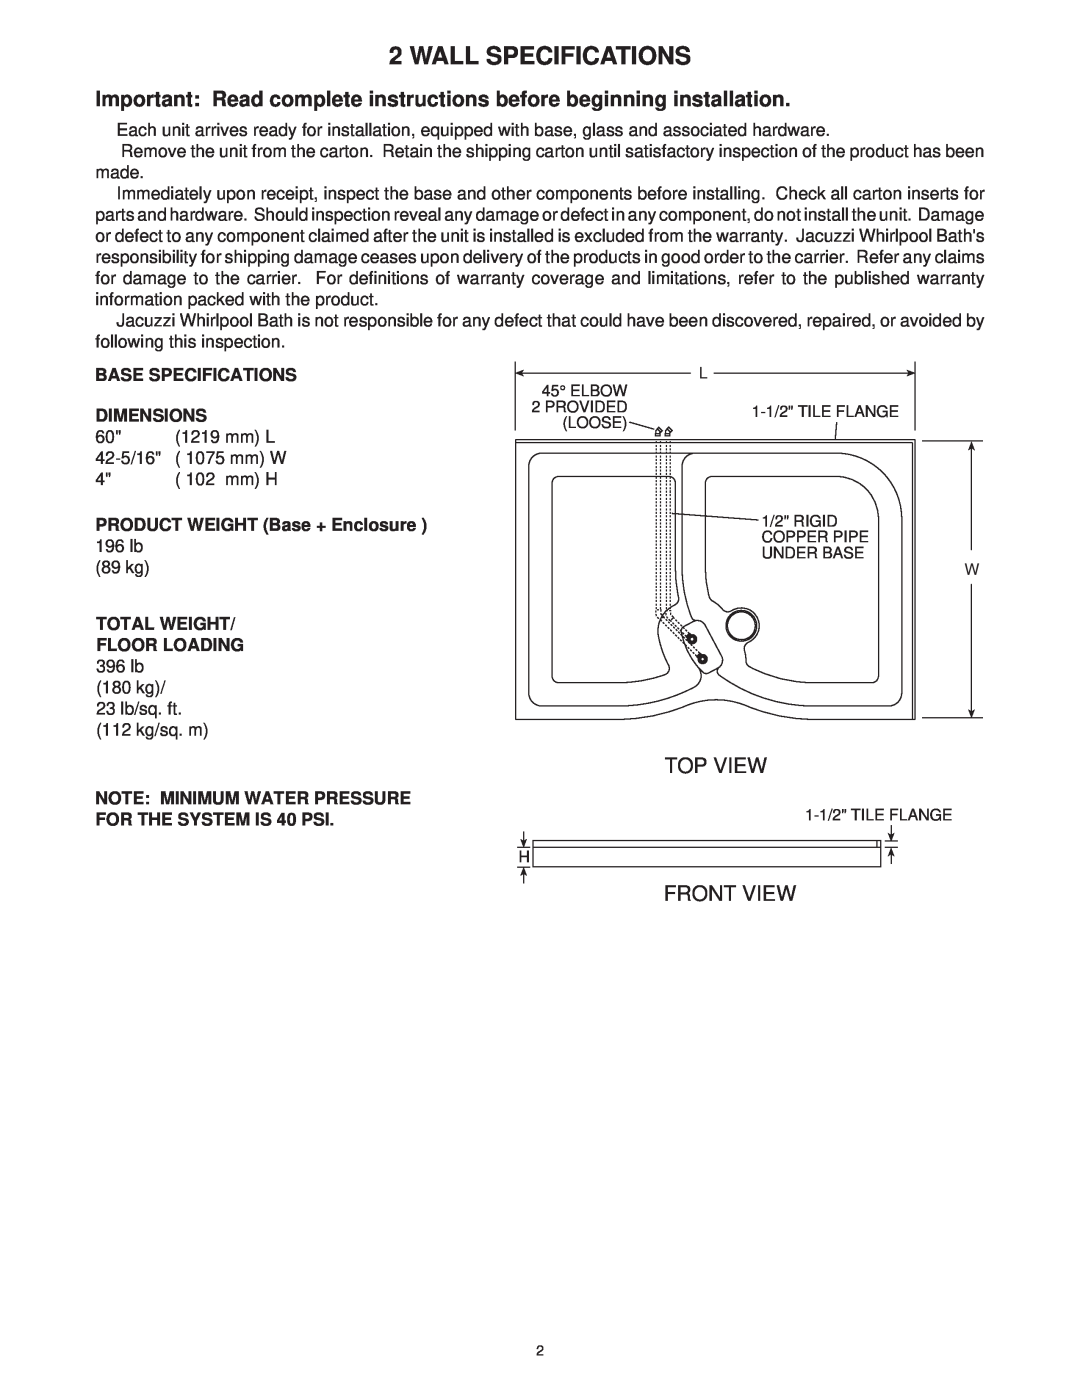 Jacuzzi 2 Wall and 3 Wall manual Wall Specifications, Important Read complete instructions before beginning installation 